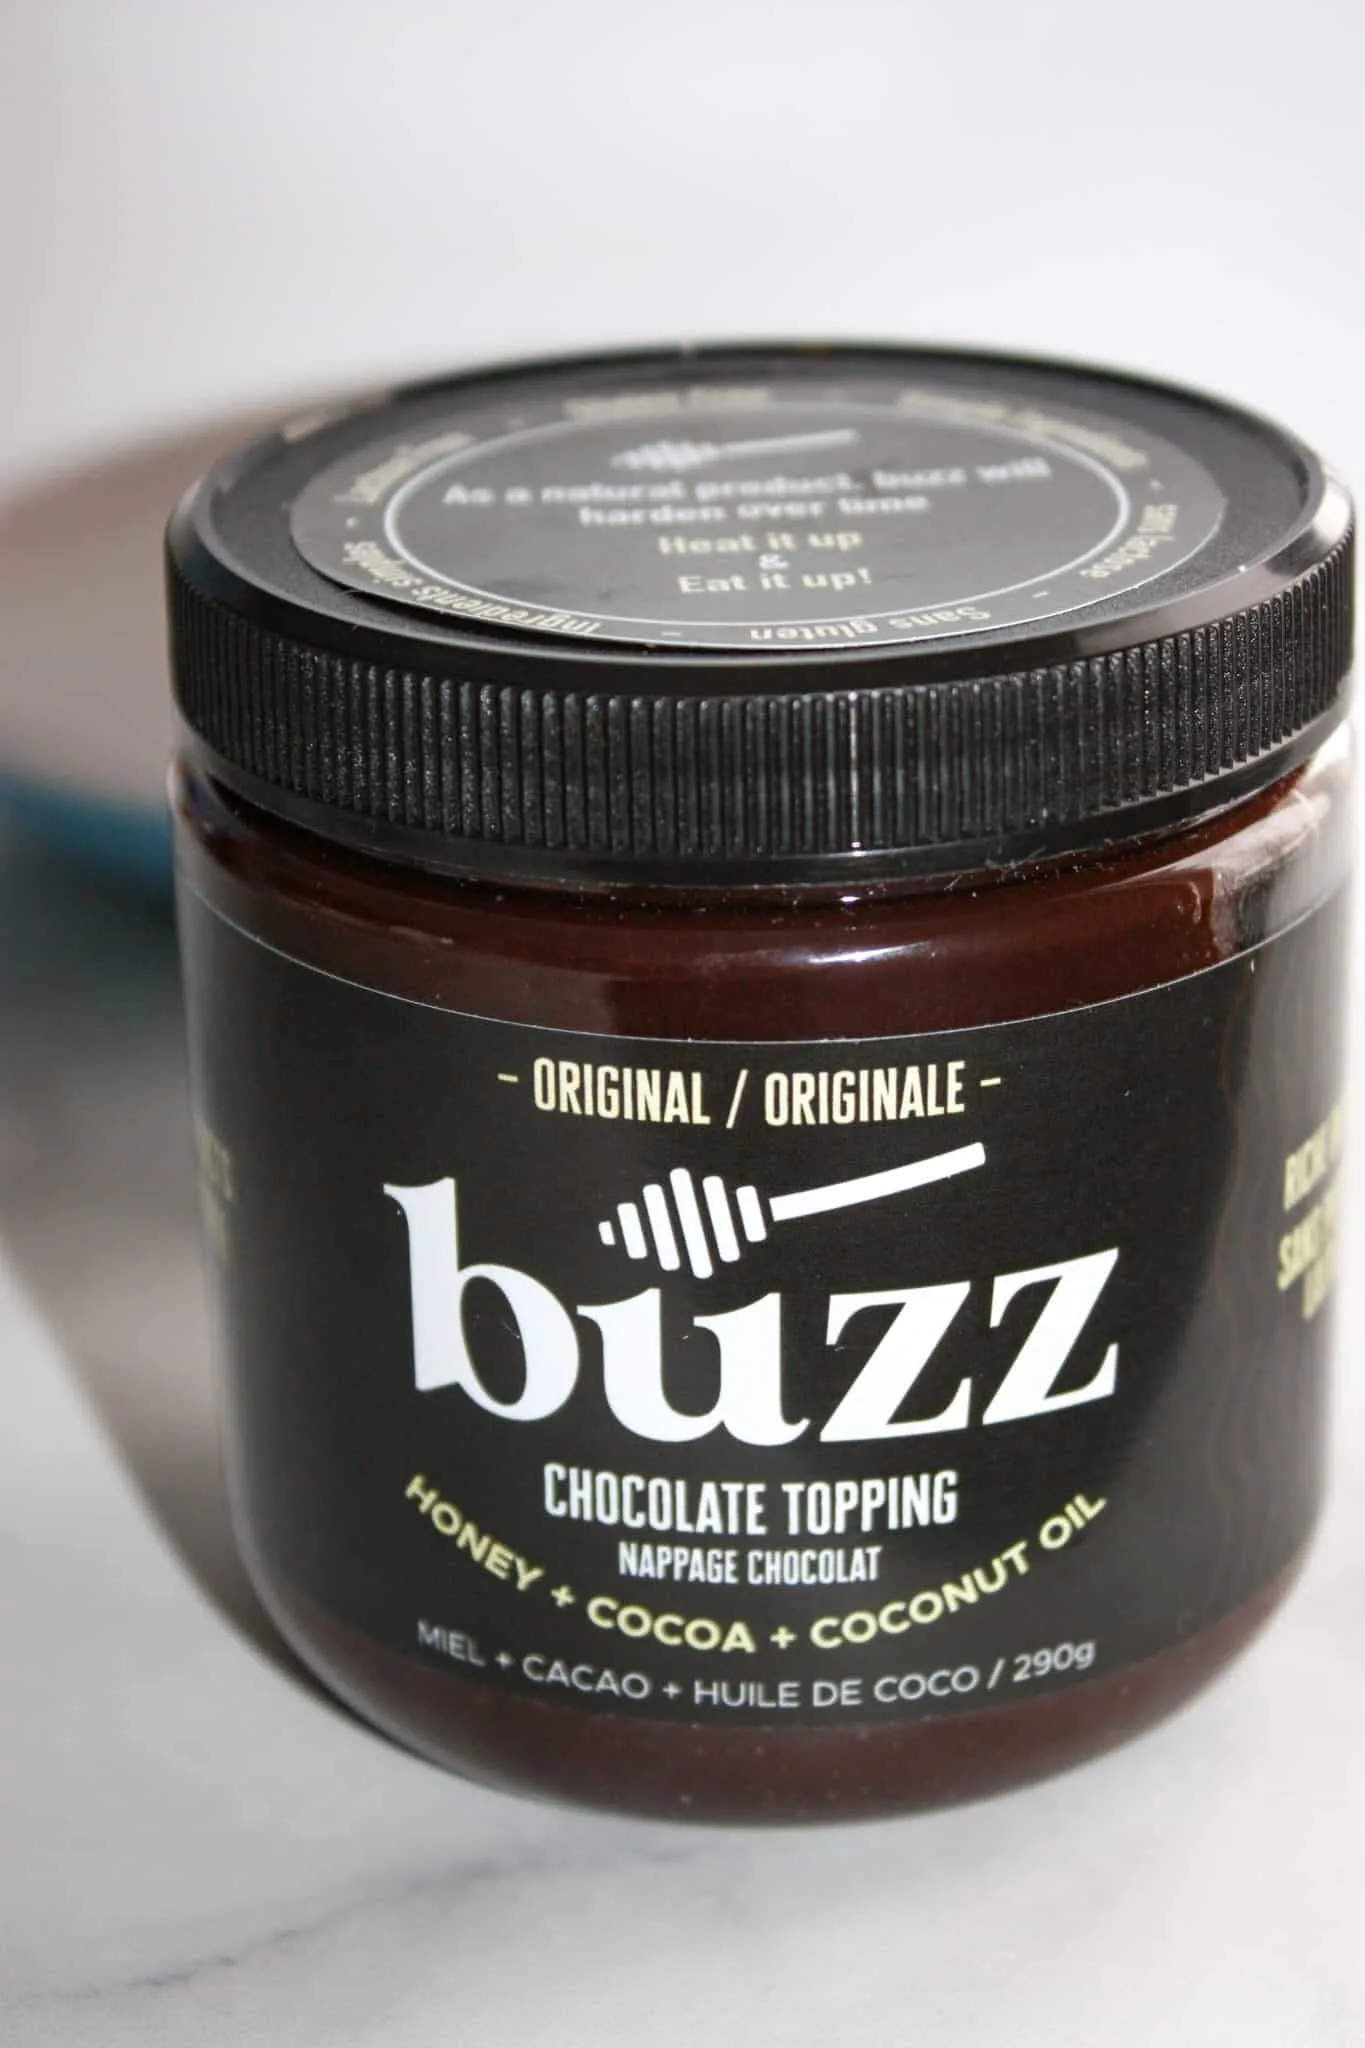 The jar of Buzz.